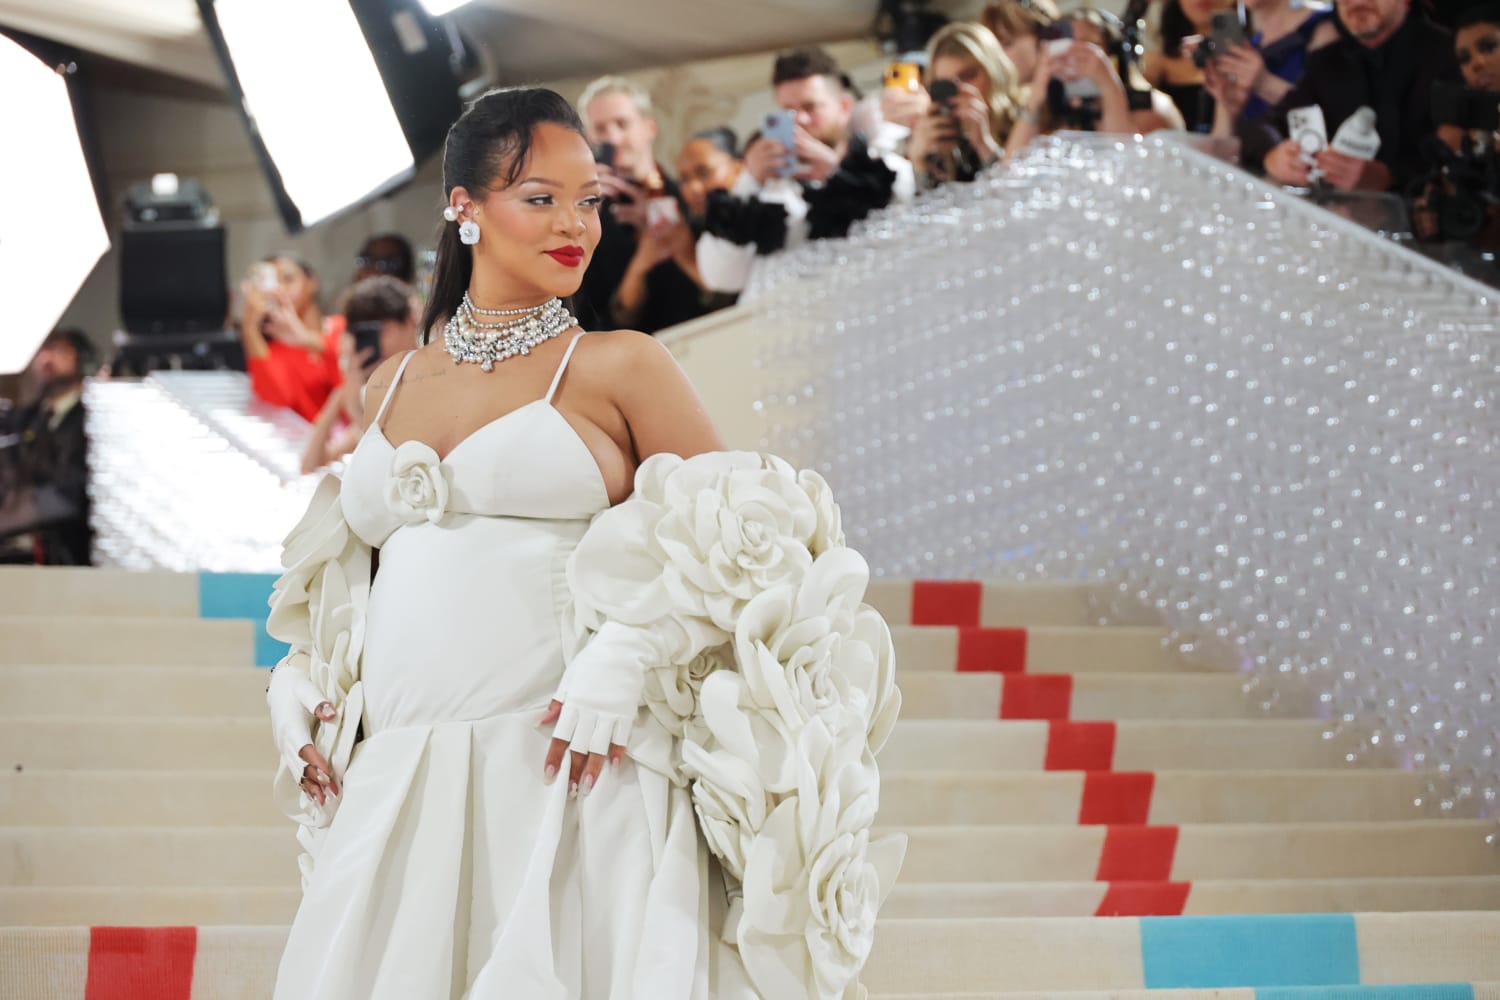 Every Celebrity Who Has Co-Chaired the Met Gala